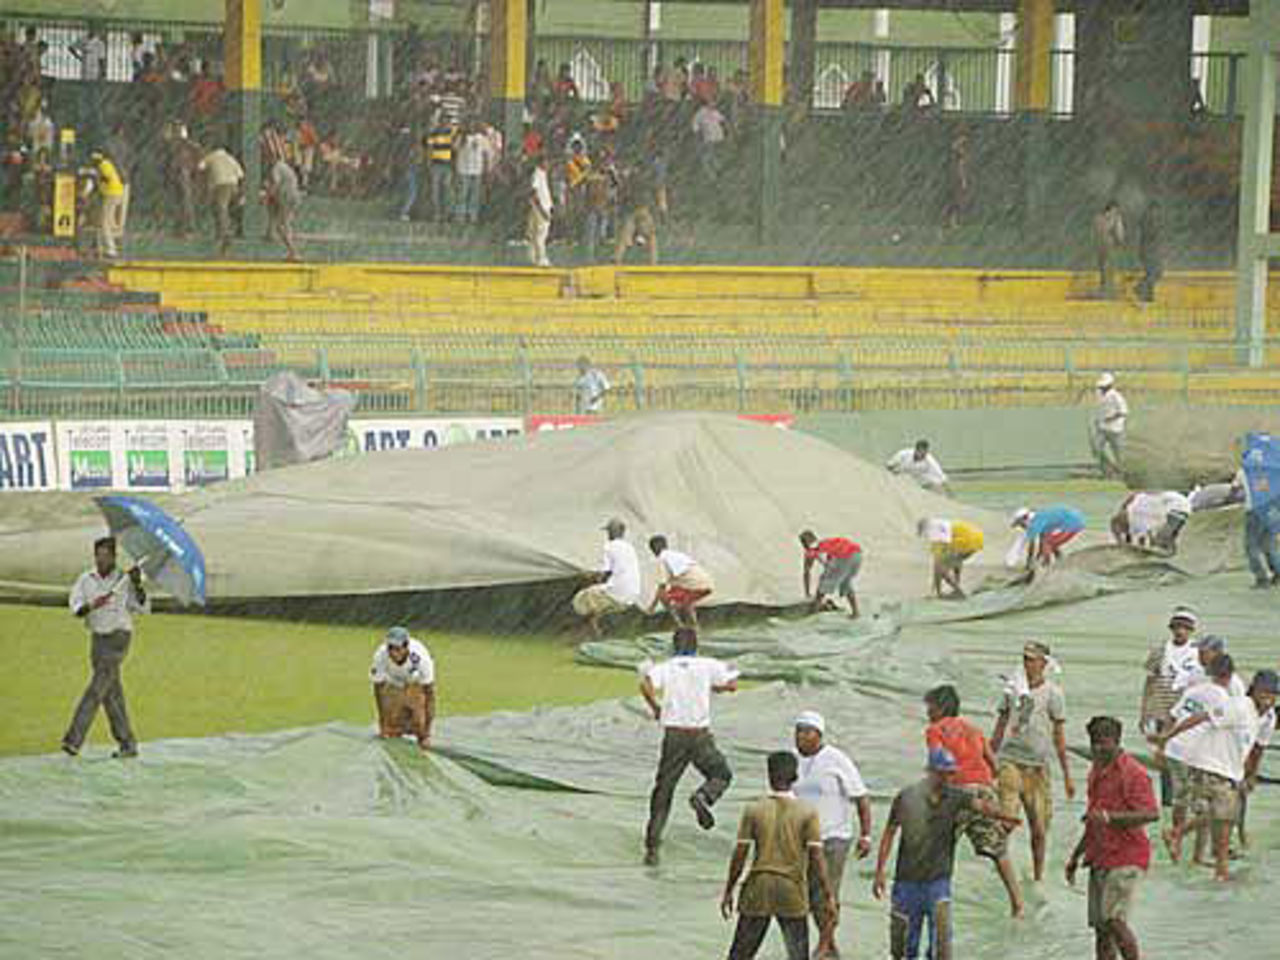 The groundstaff cover the ground during a rain shower, Colombo, September 4, 2009